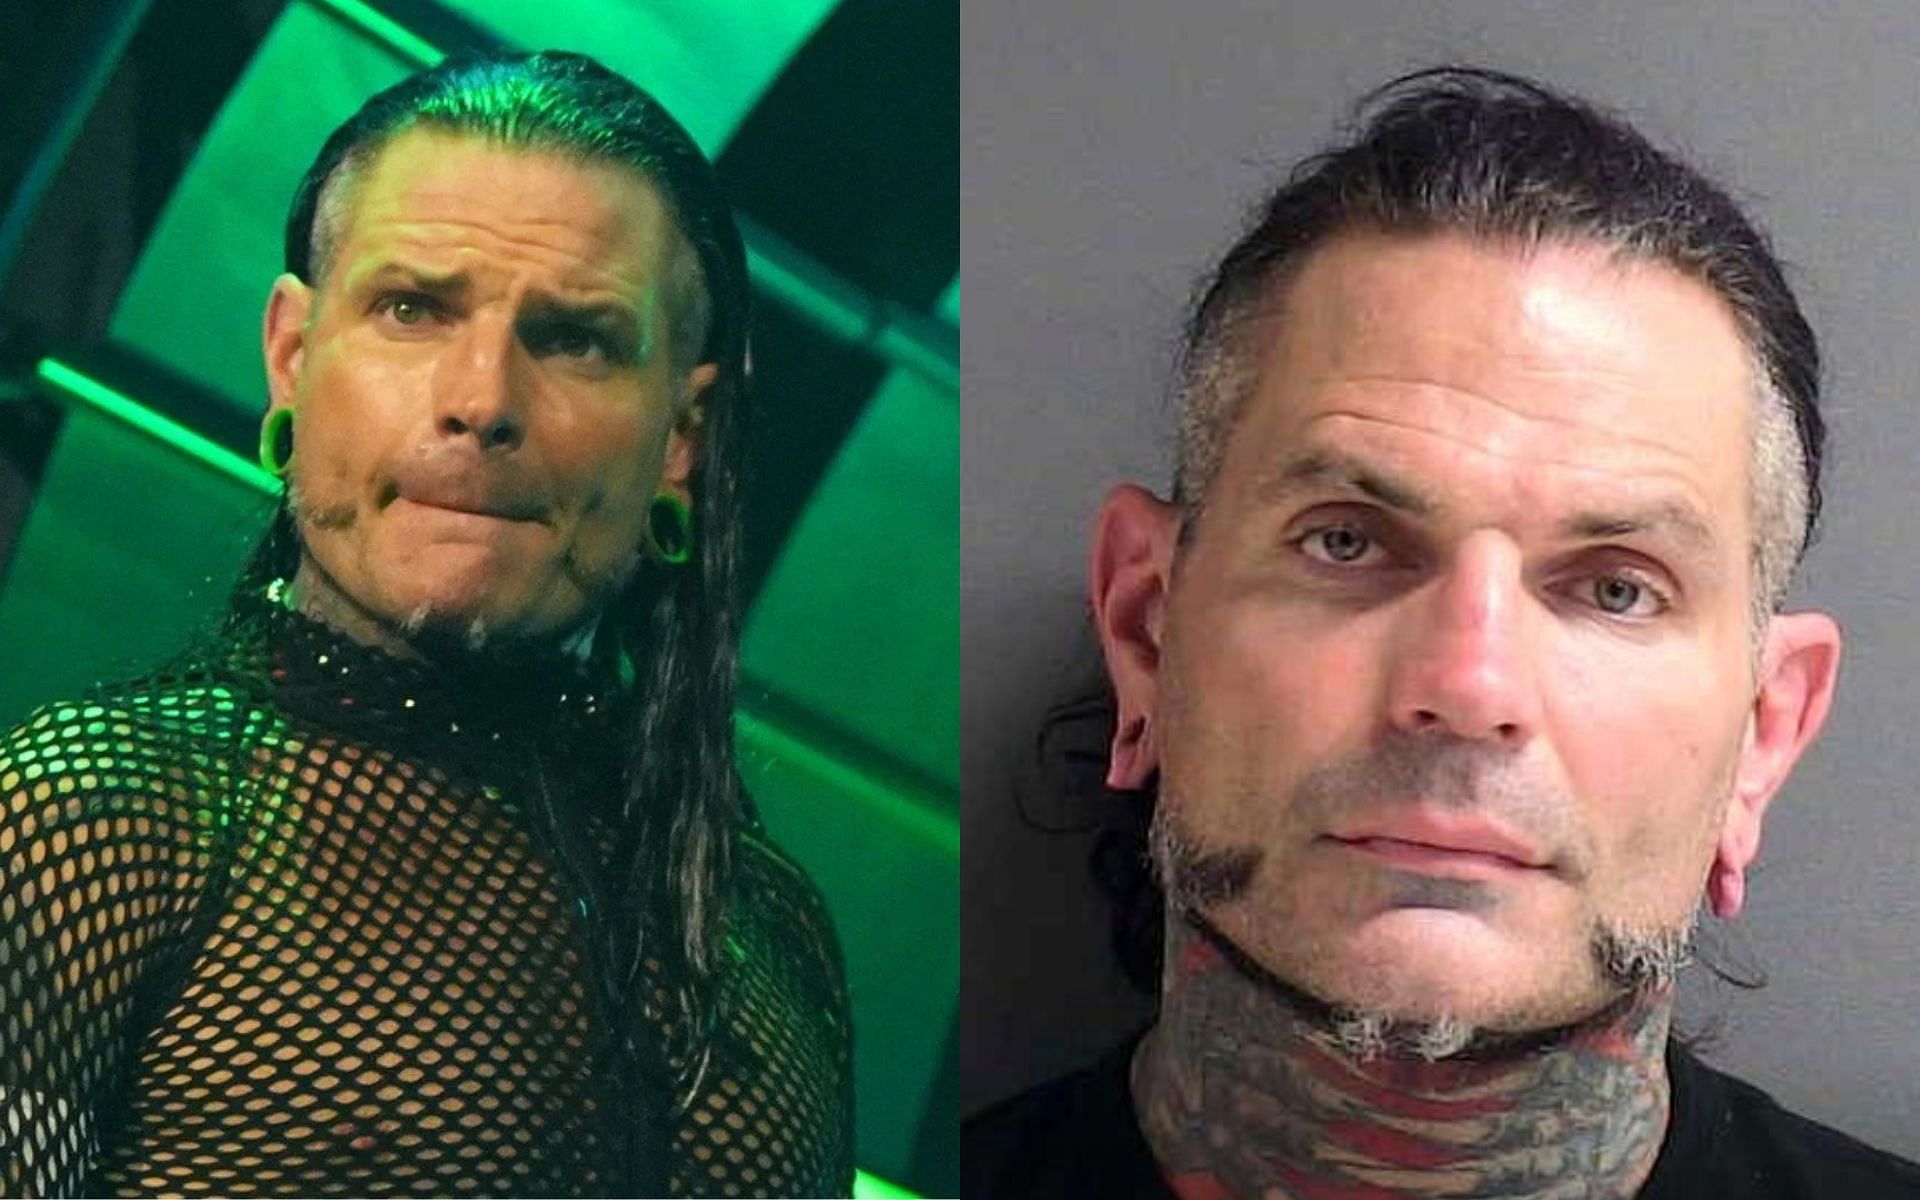 Jeff Hardy was arrested for his third DUI in June this year